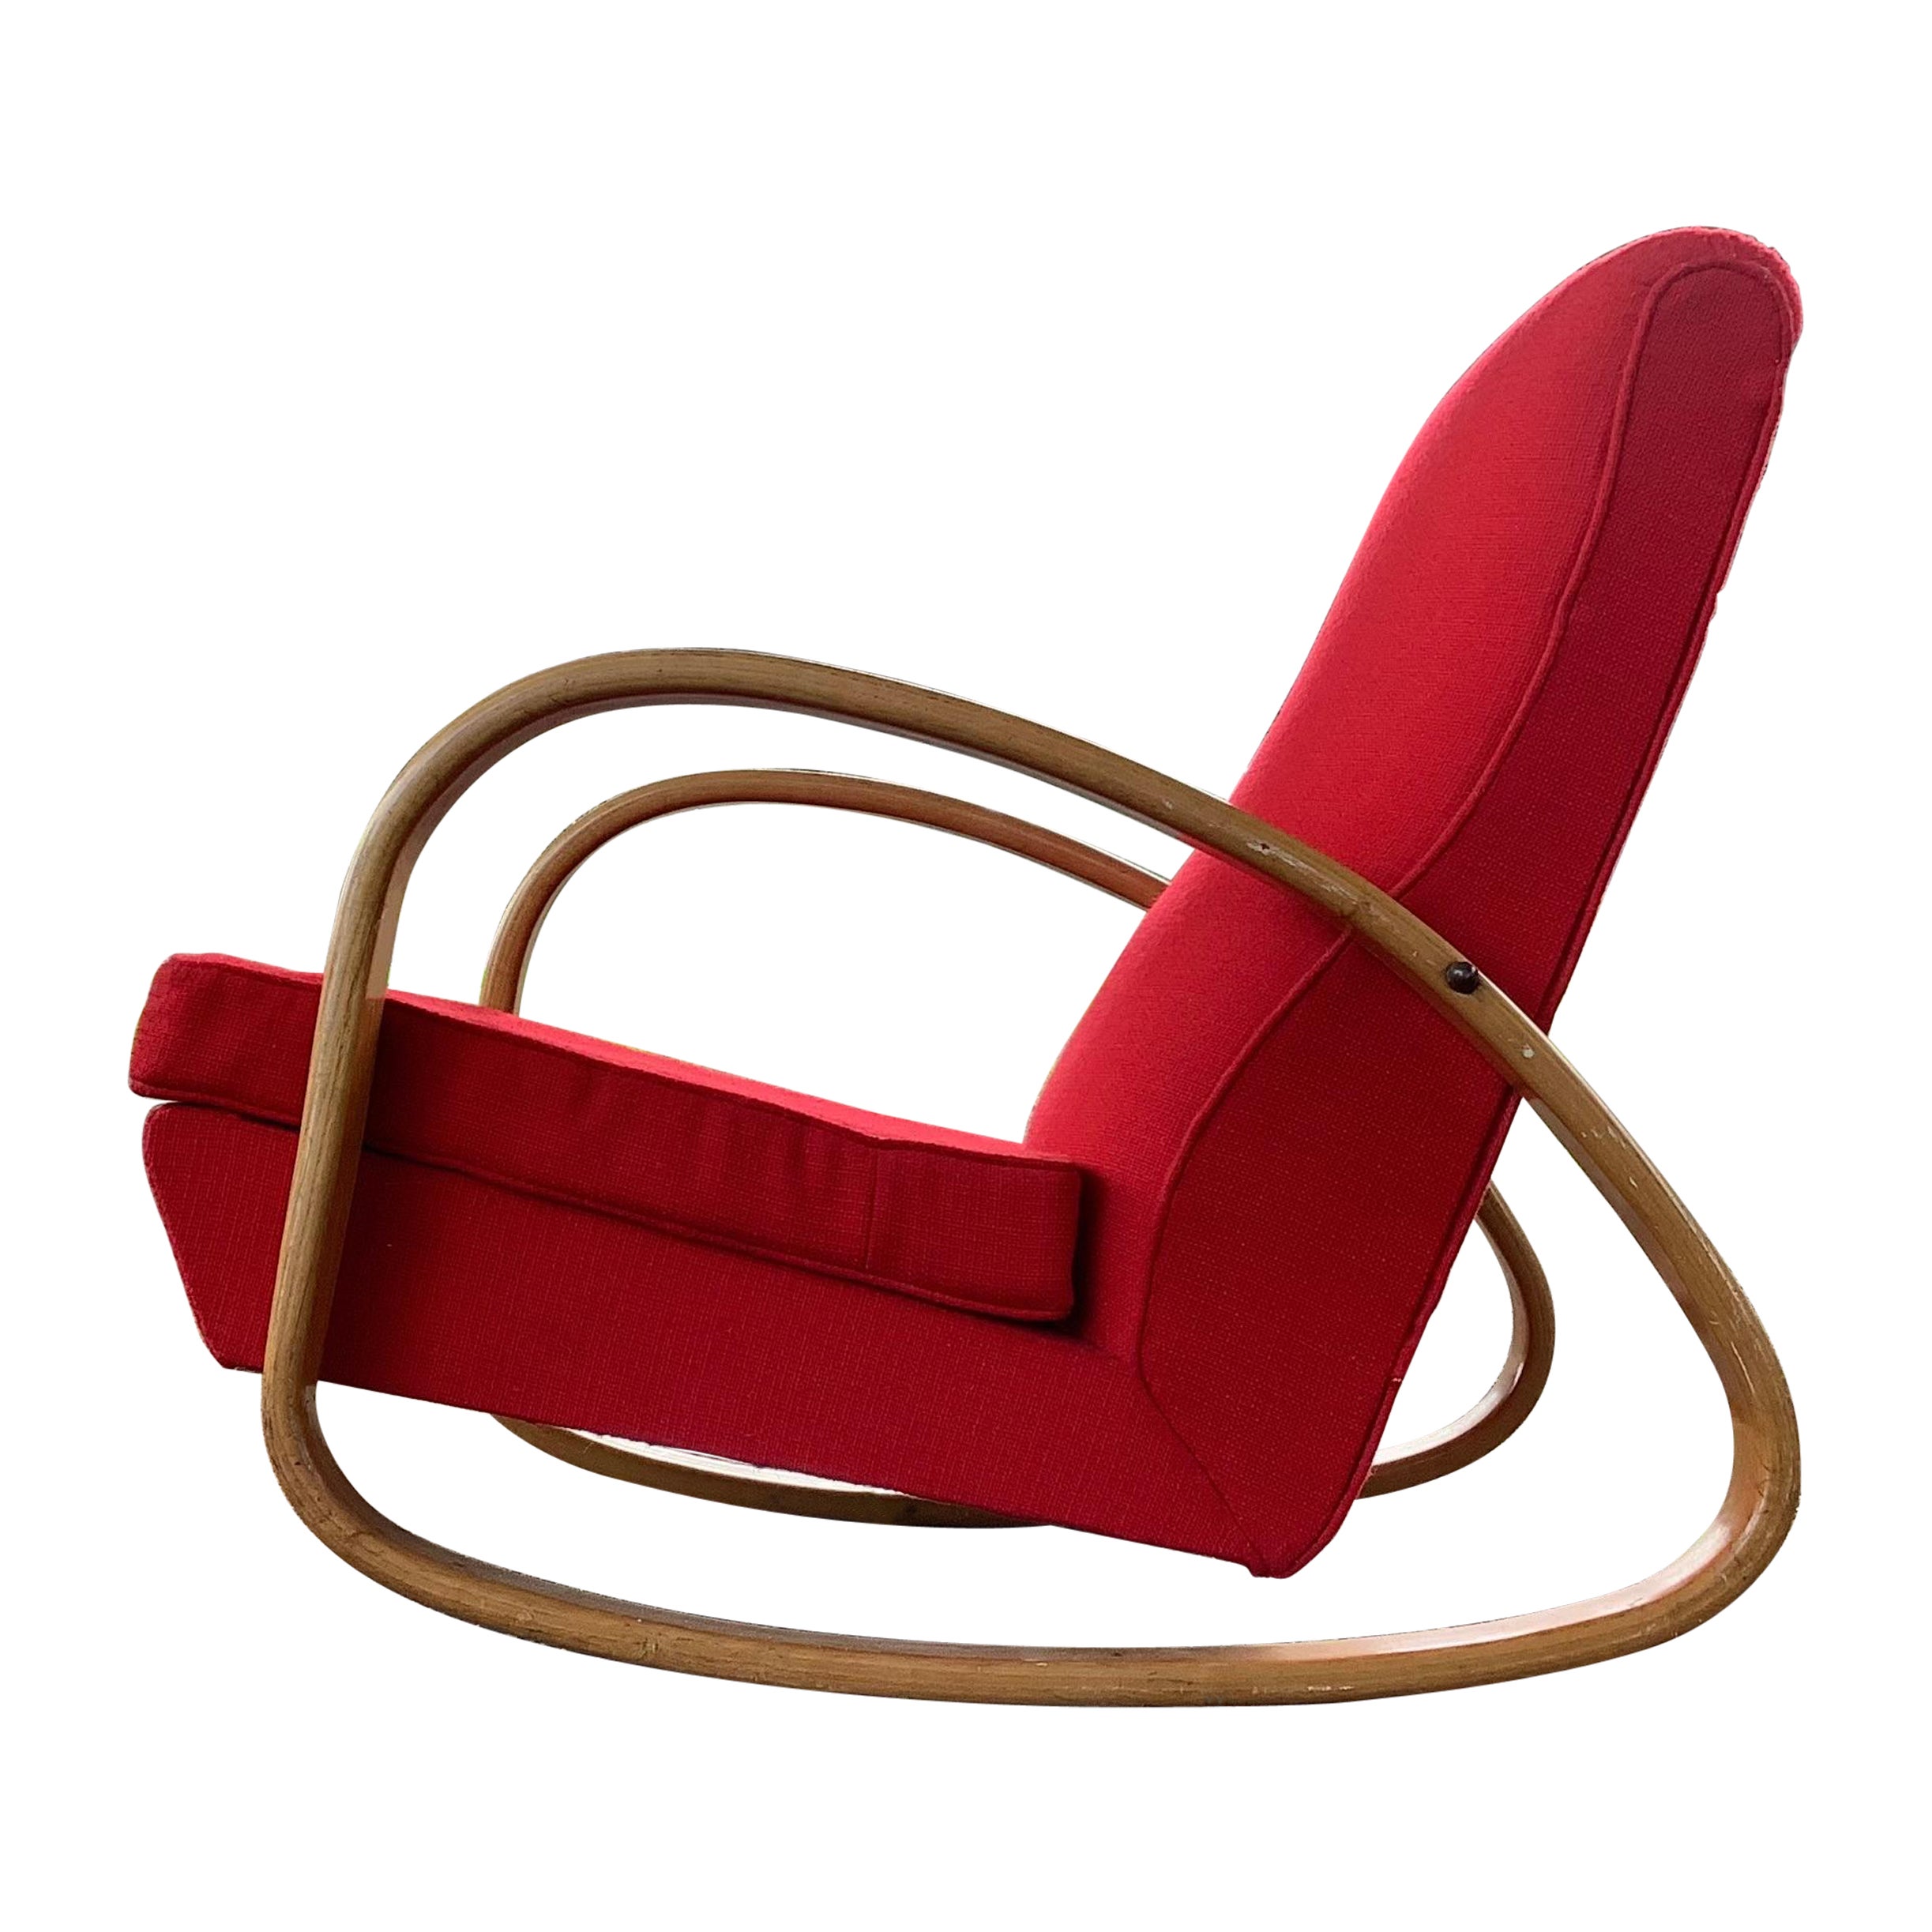 1960’s French rocking chair For Sale